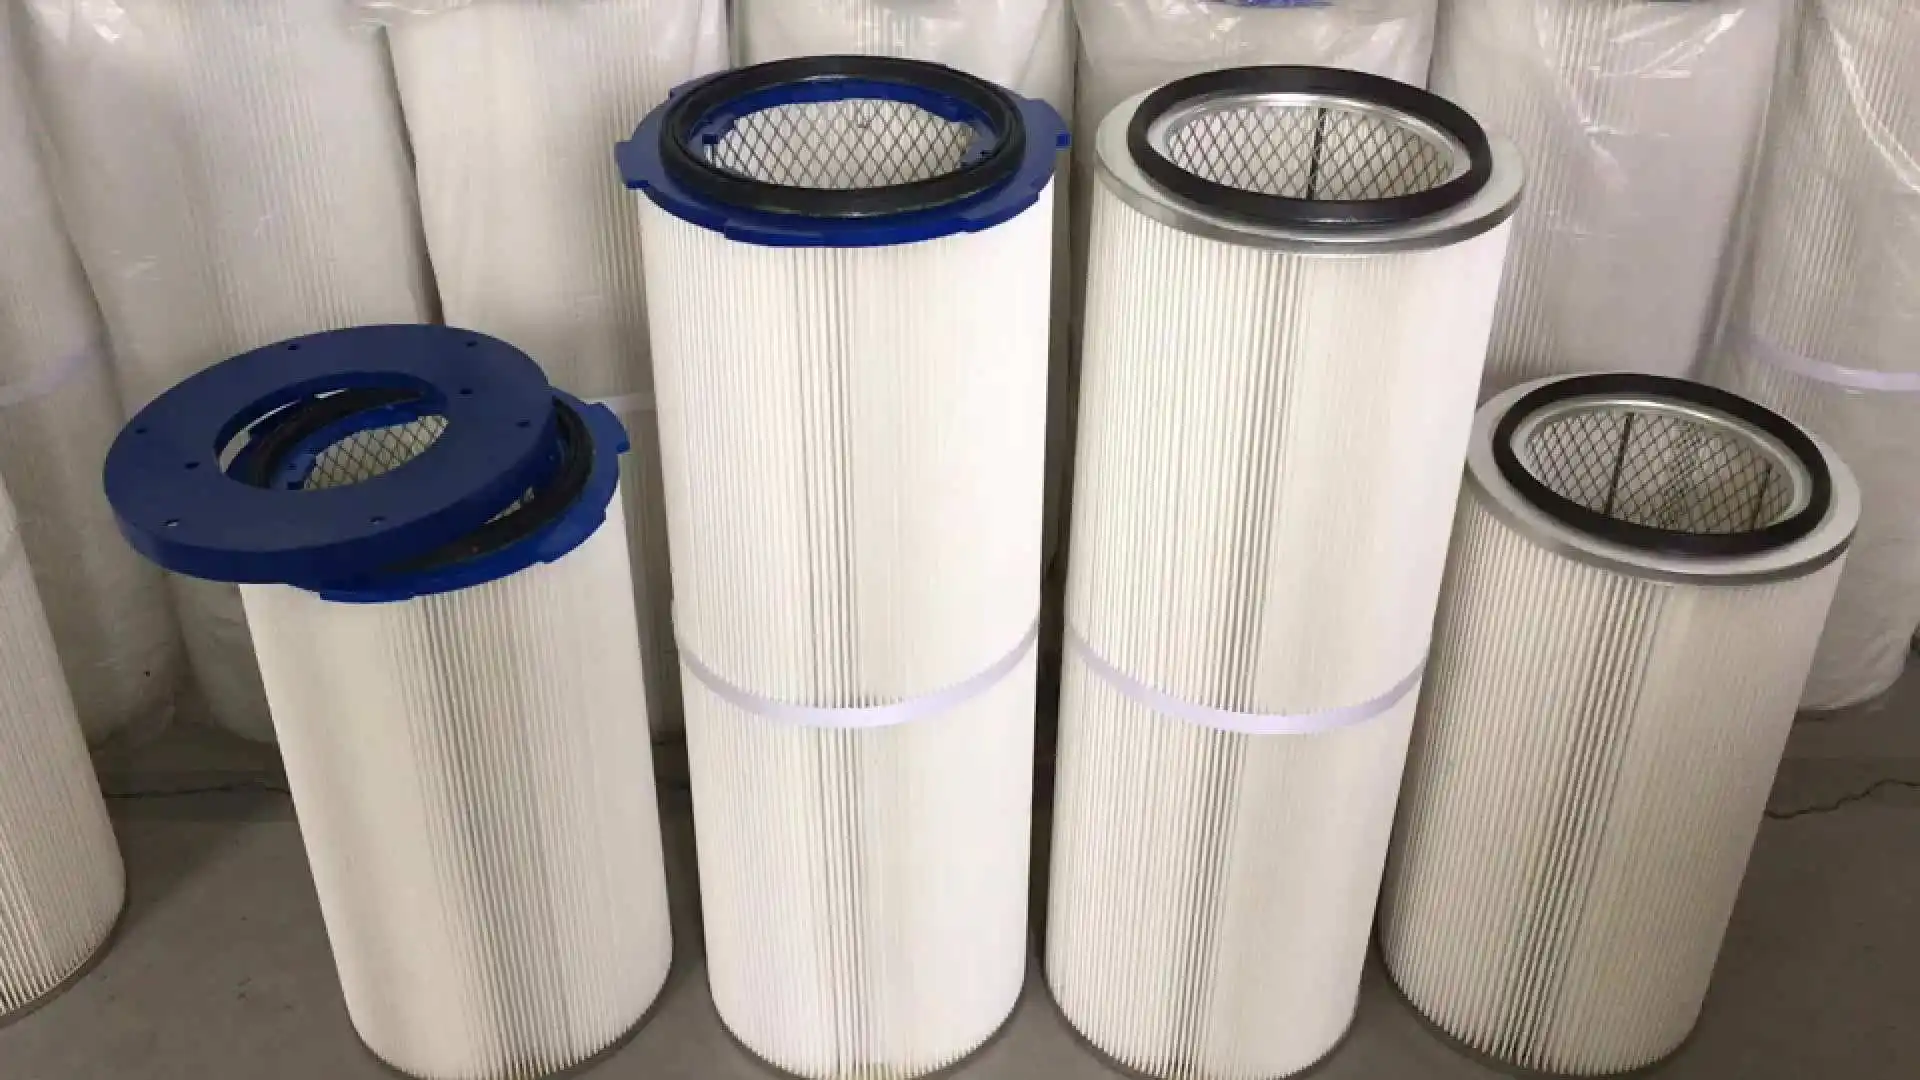 What are the materials of the dust removal filter cartridge？